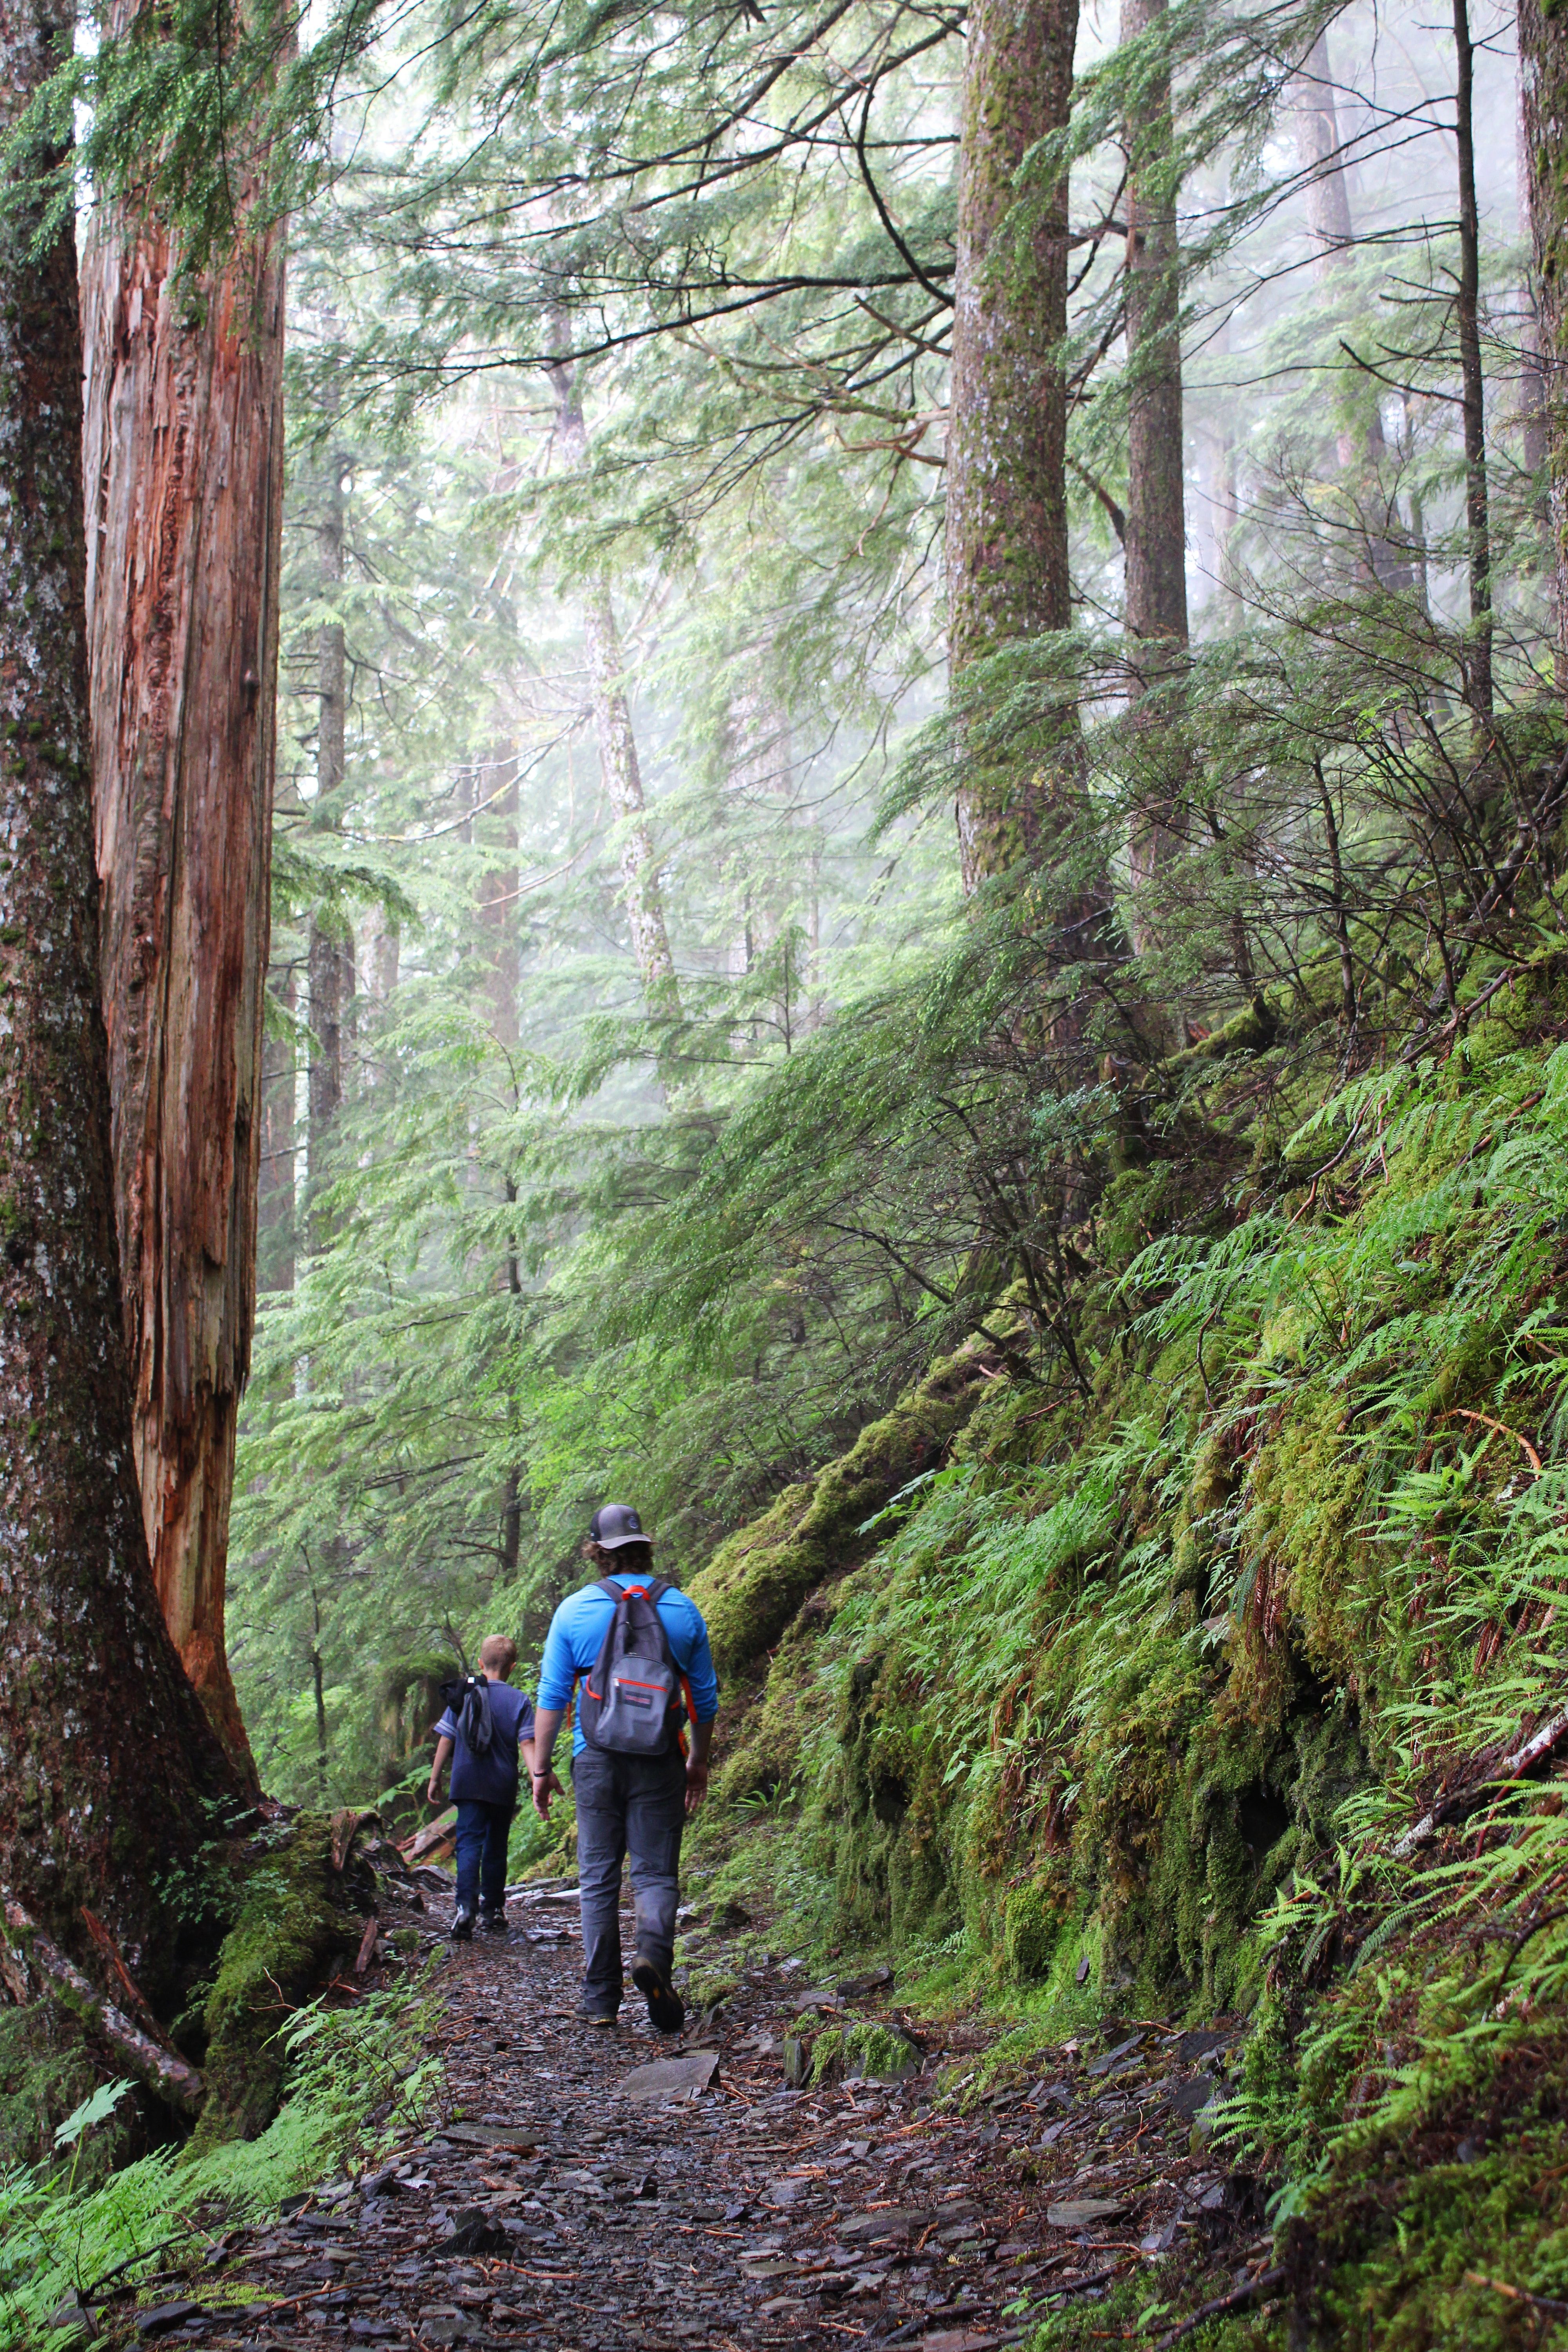 A man and a young boy on a trail surrounded by trees in Tongass National Forest Alaska